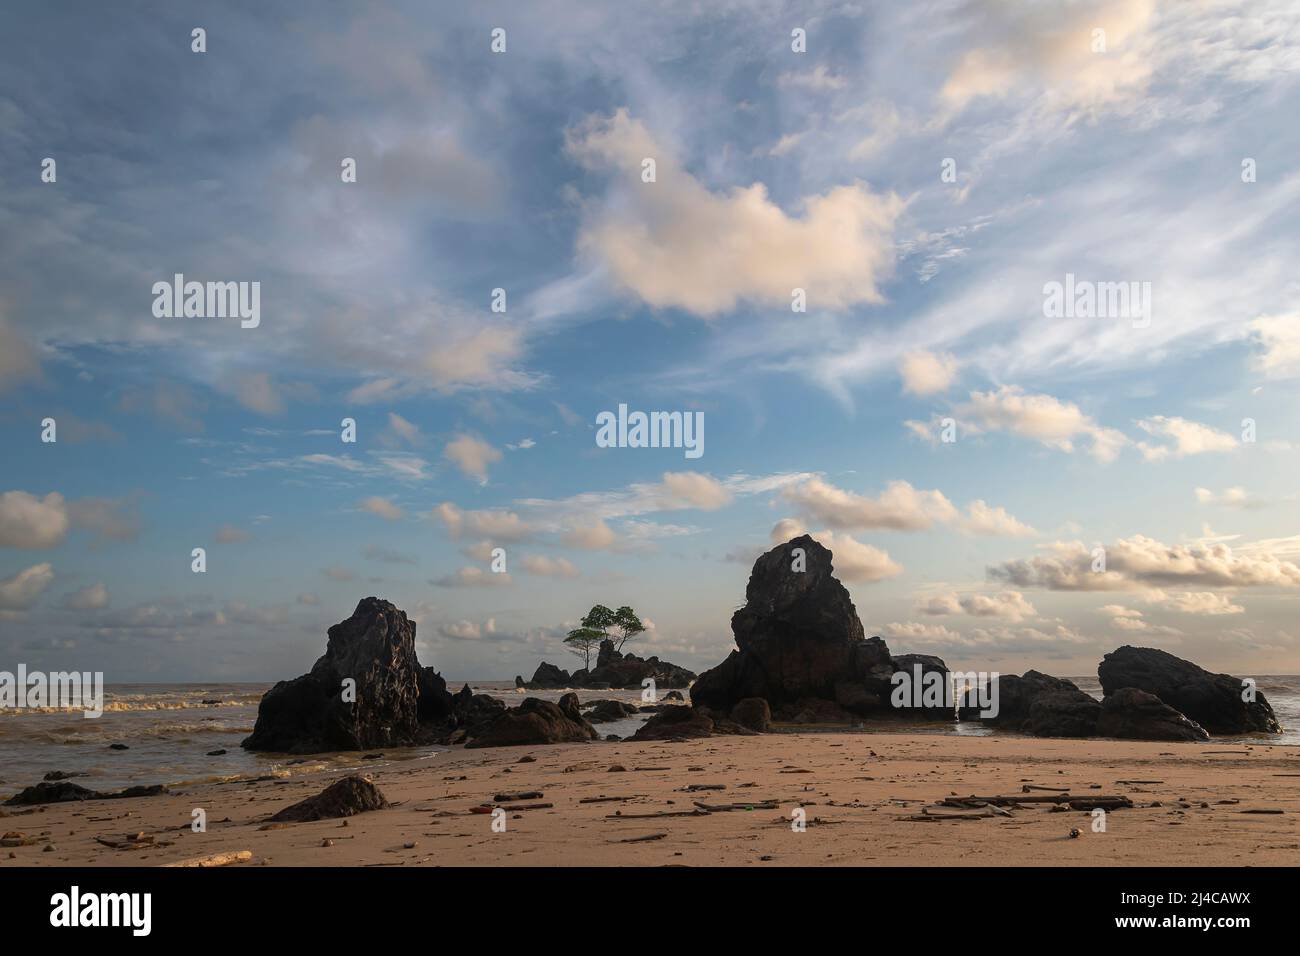 Sunset over Ghana West Africa's seas and rocks in silhouette Stock Photo